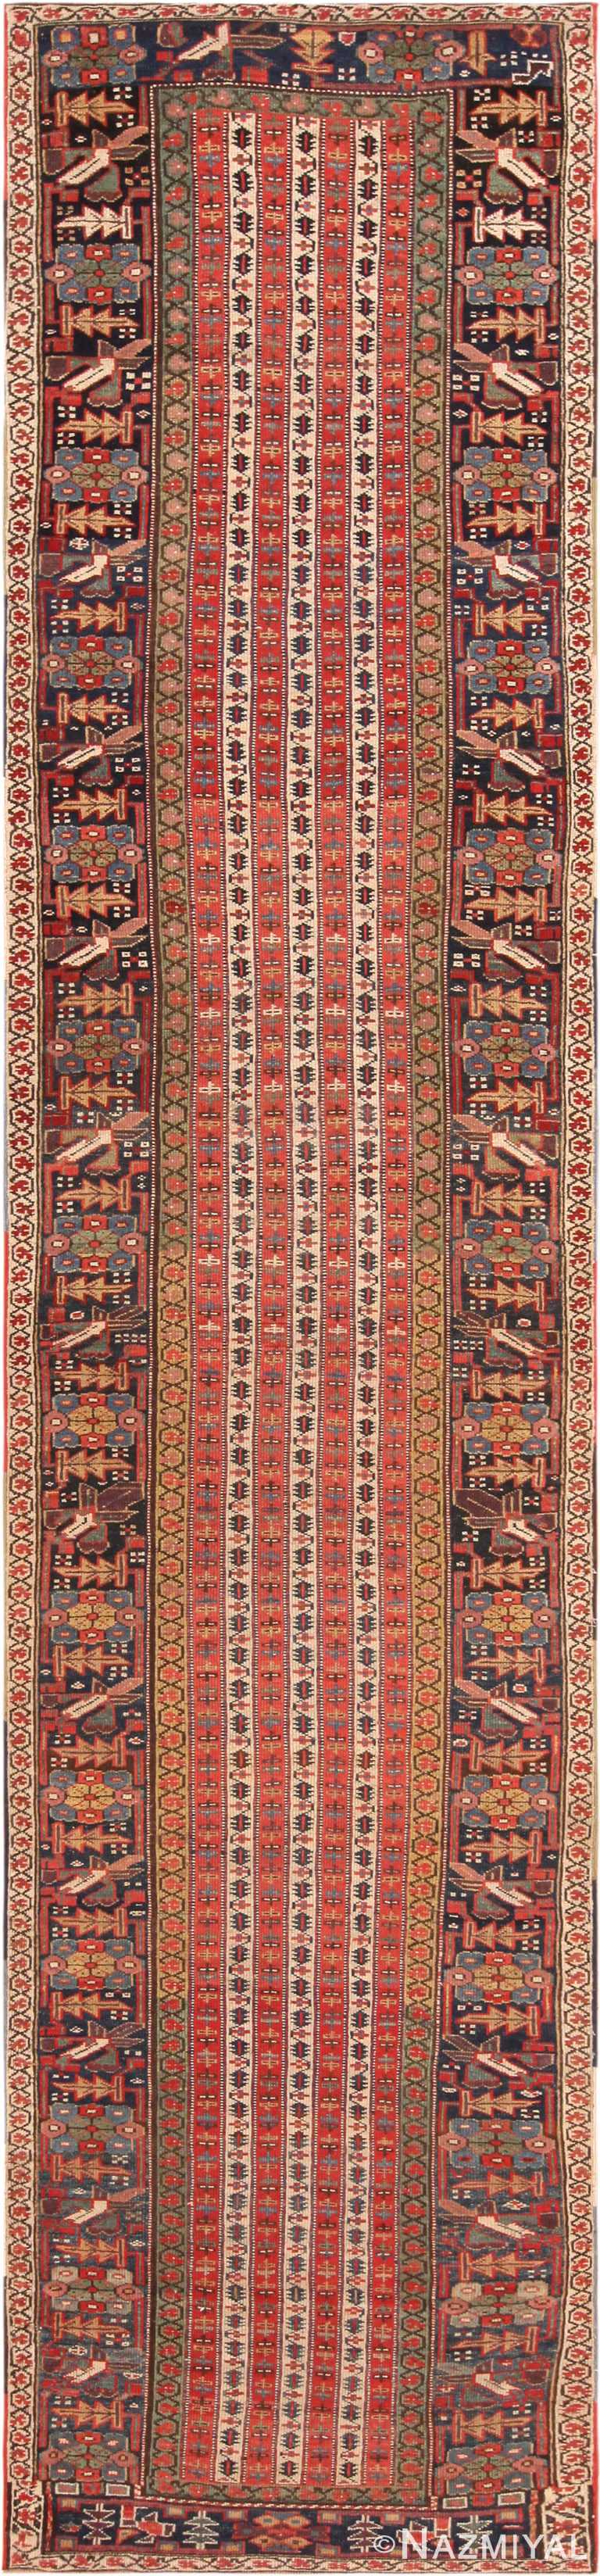 Antique North West Persian Runner Rug 72083 by Nazmiyal Antique Rugs